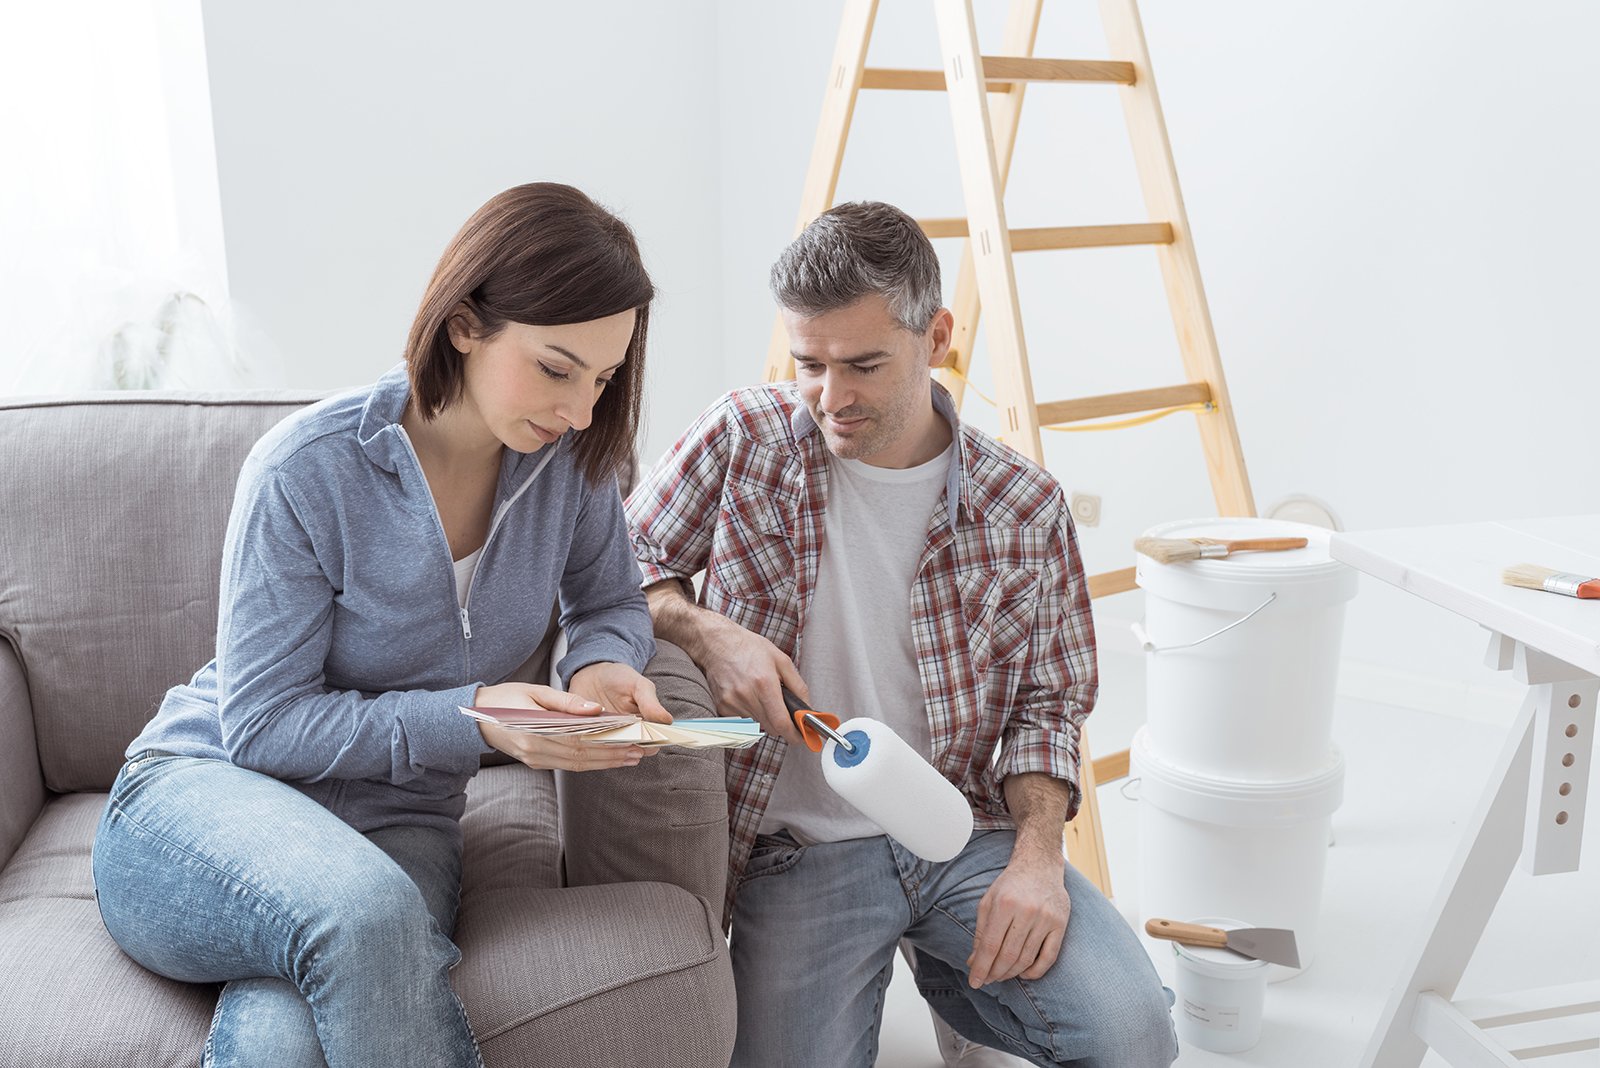 Attract Potential Buyers With These Top 5 Low Cost Home Improvements| Carolina's Choice Real Estate